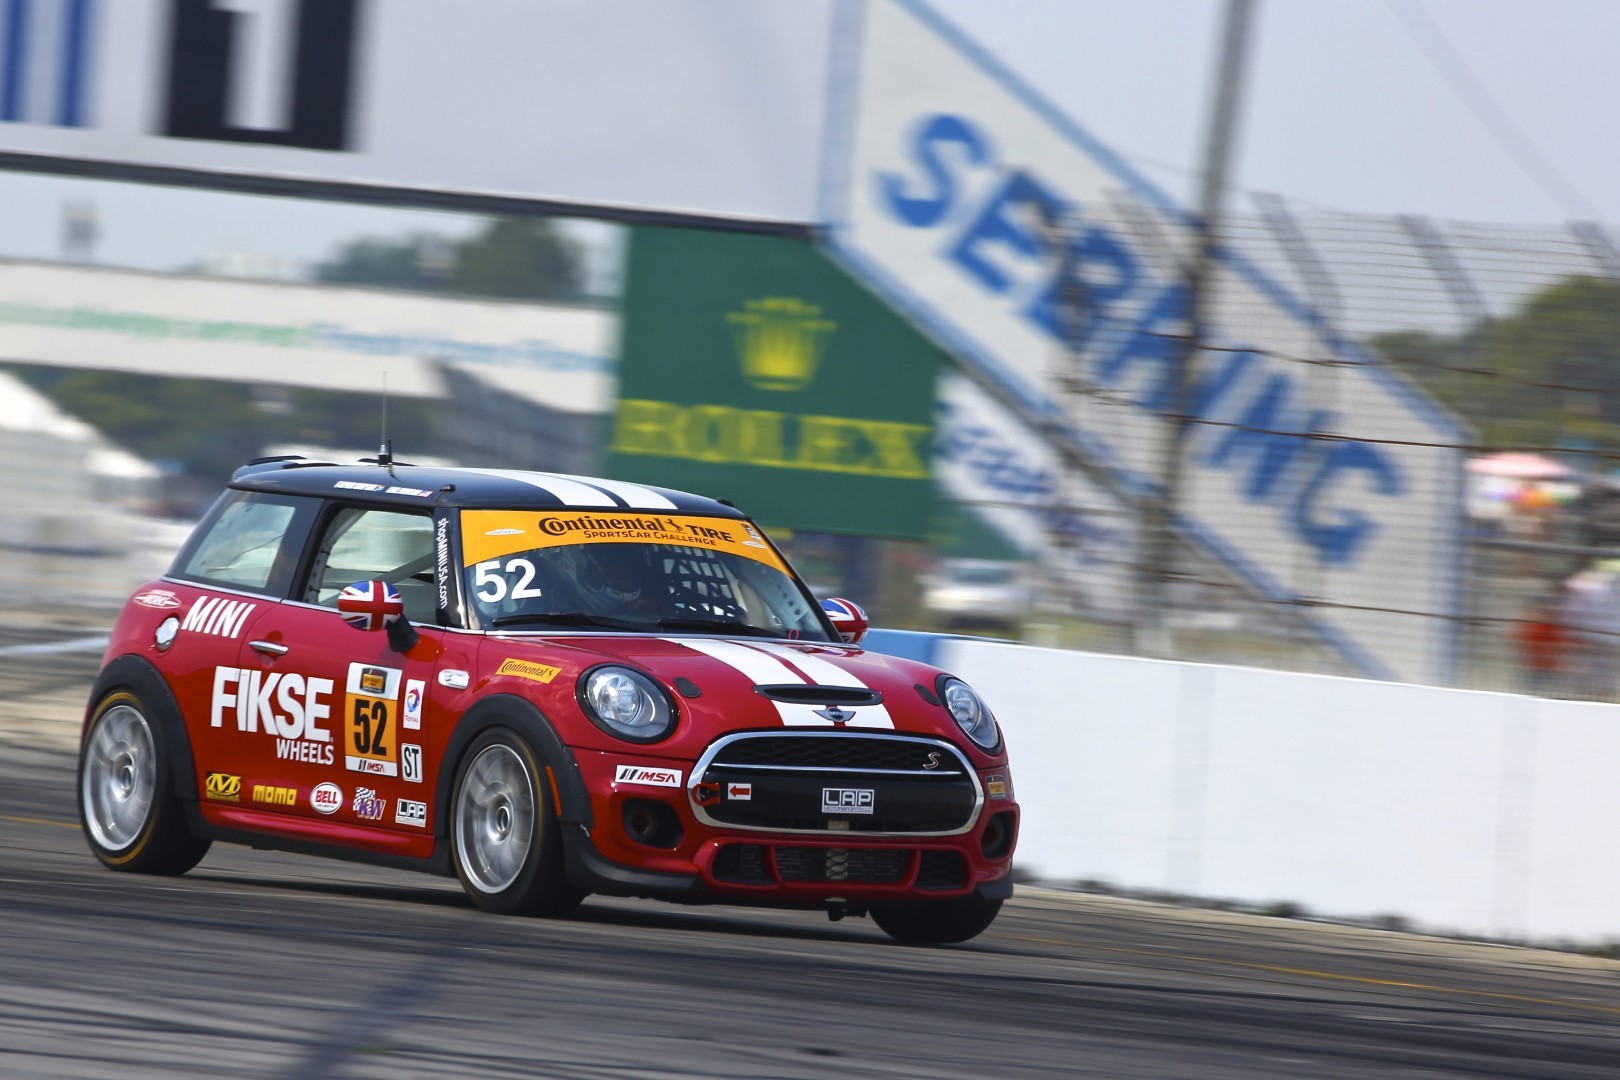 MINI John Cooper Works team finishes well on its first outing at Sebring